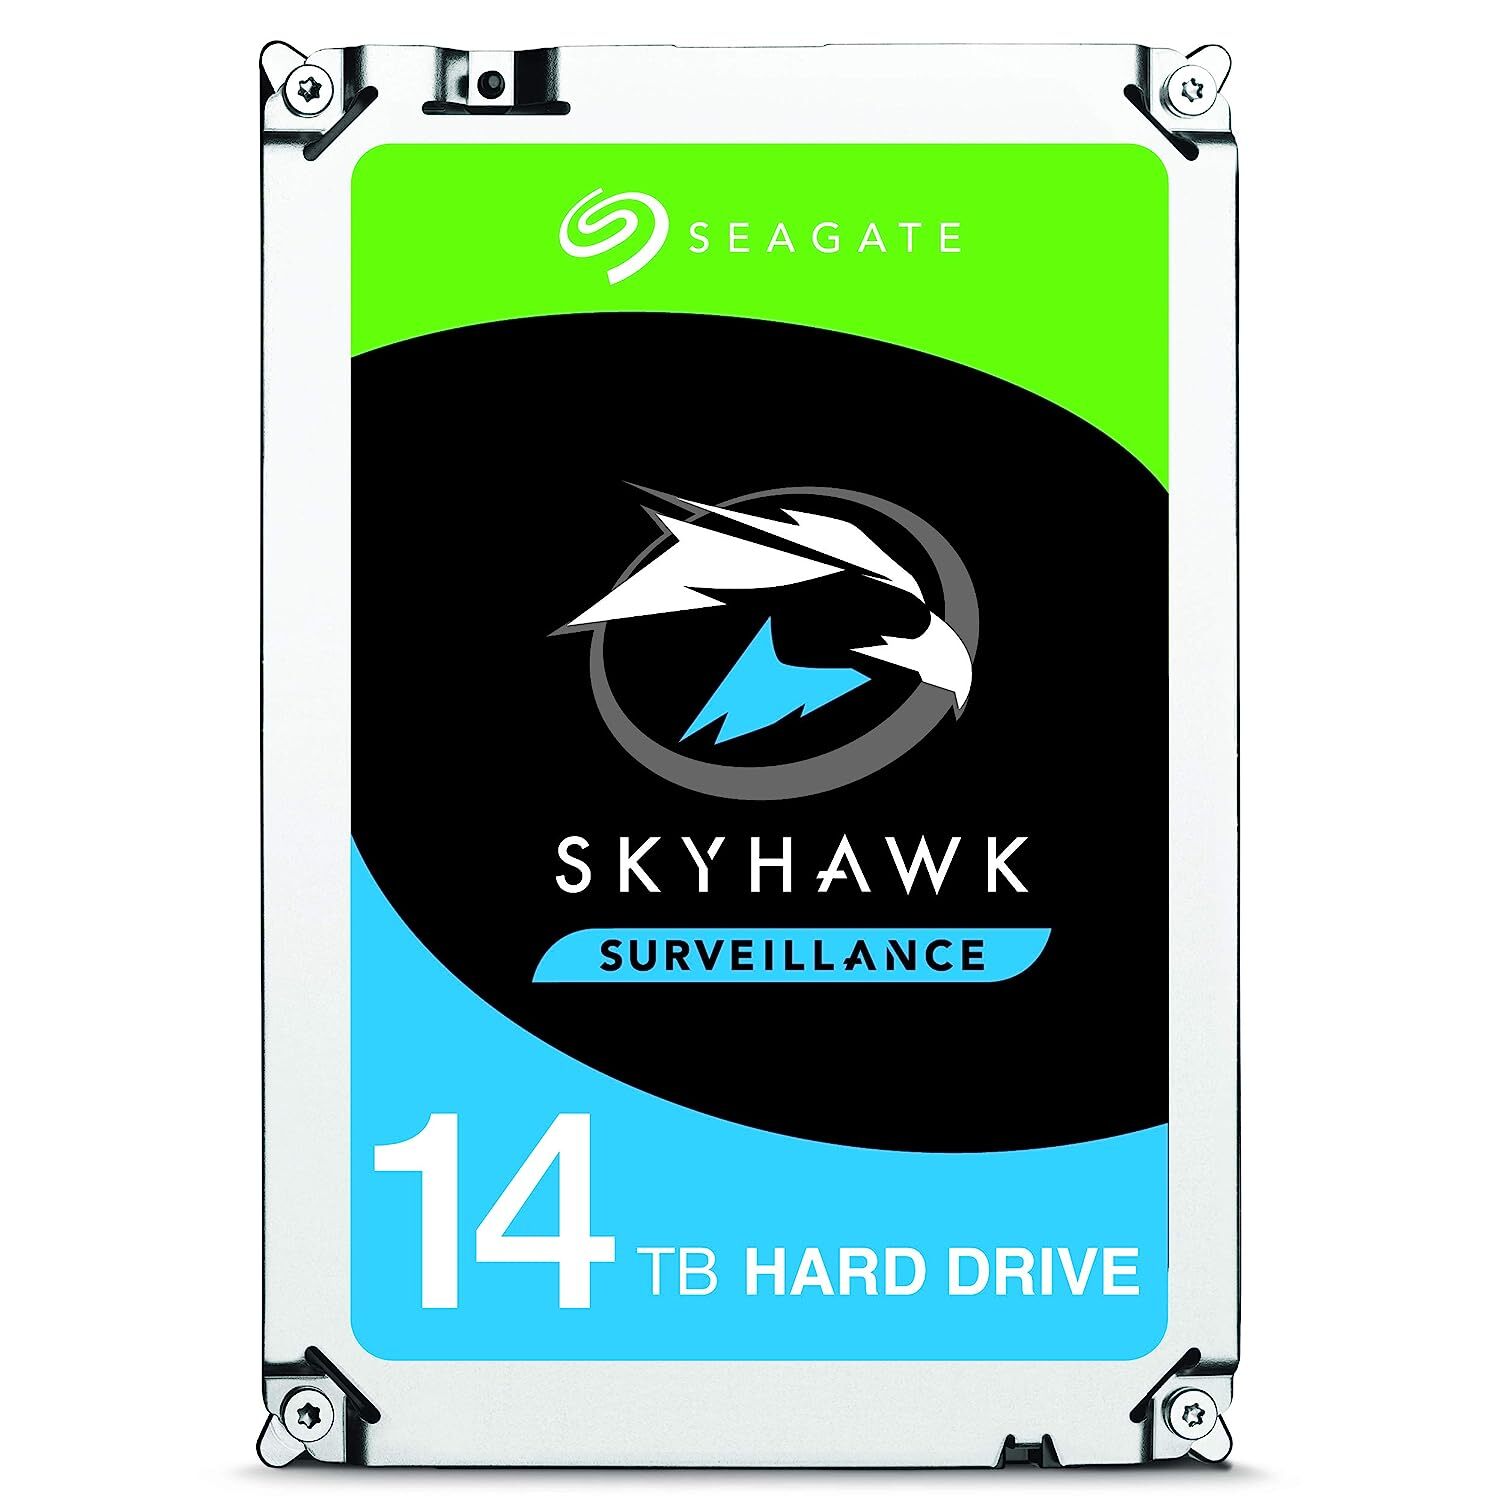 Seagate Skyhawk 14 TB Surveillance Internal Hard Drive HDD – 3.5 Inch SATA 6 Gb/s 256 MB Cache for DVR NVR Security Camera System with Drive Health Management (ST14000VX0008)